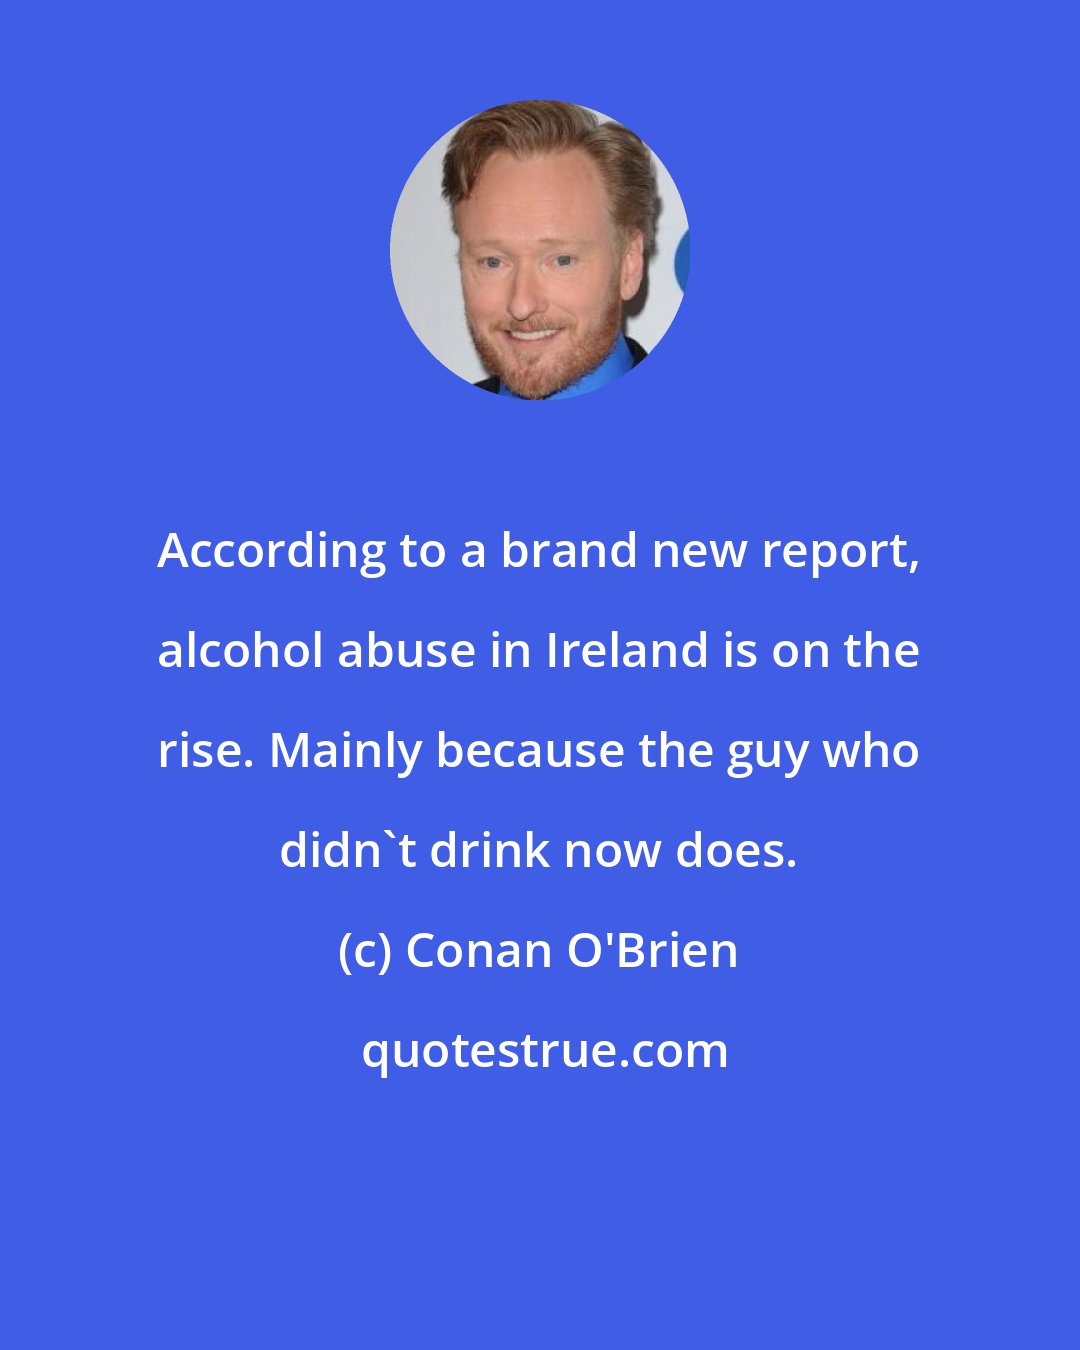 Conan O'Brien: According to a brand new report, alcohol abuse in Ireland is on the rise. Mainly because the guy who didn't drink now does.